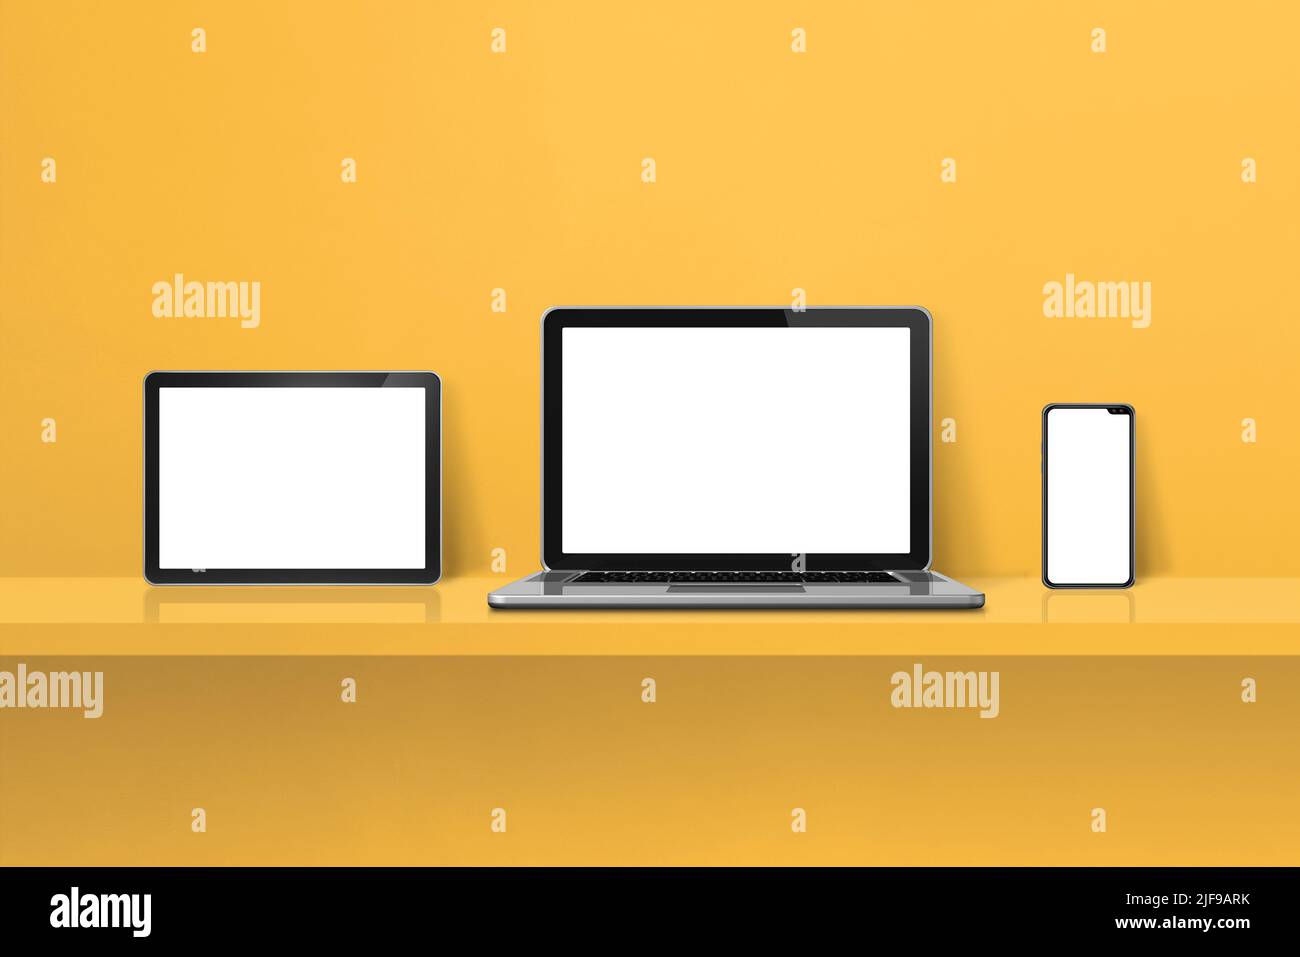 Laptop, mobile phone and digital tablet pc on yellow wall shelf. Horizontal background. 3D Illustration Stock Photo